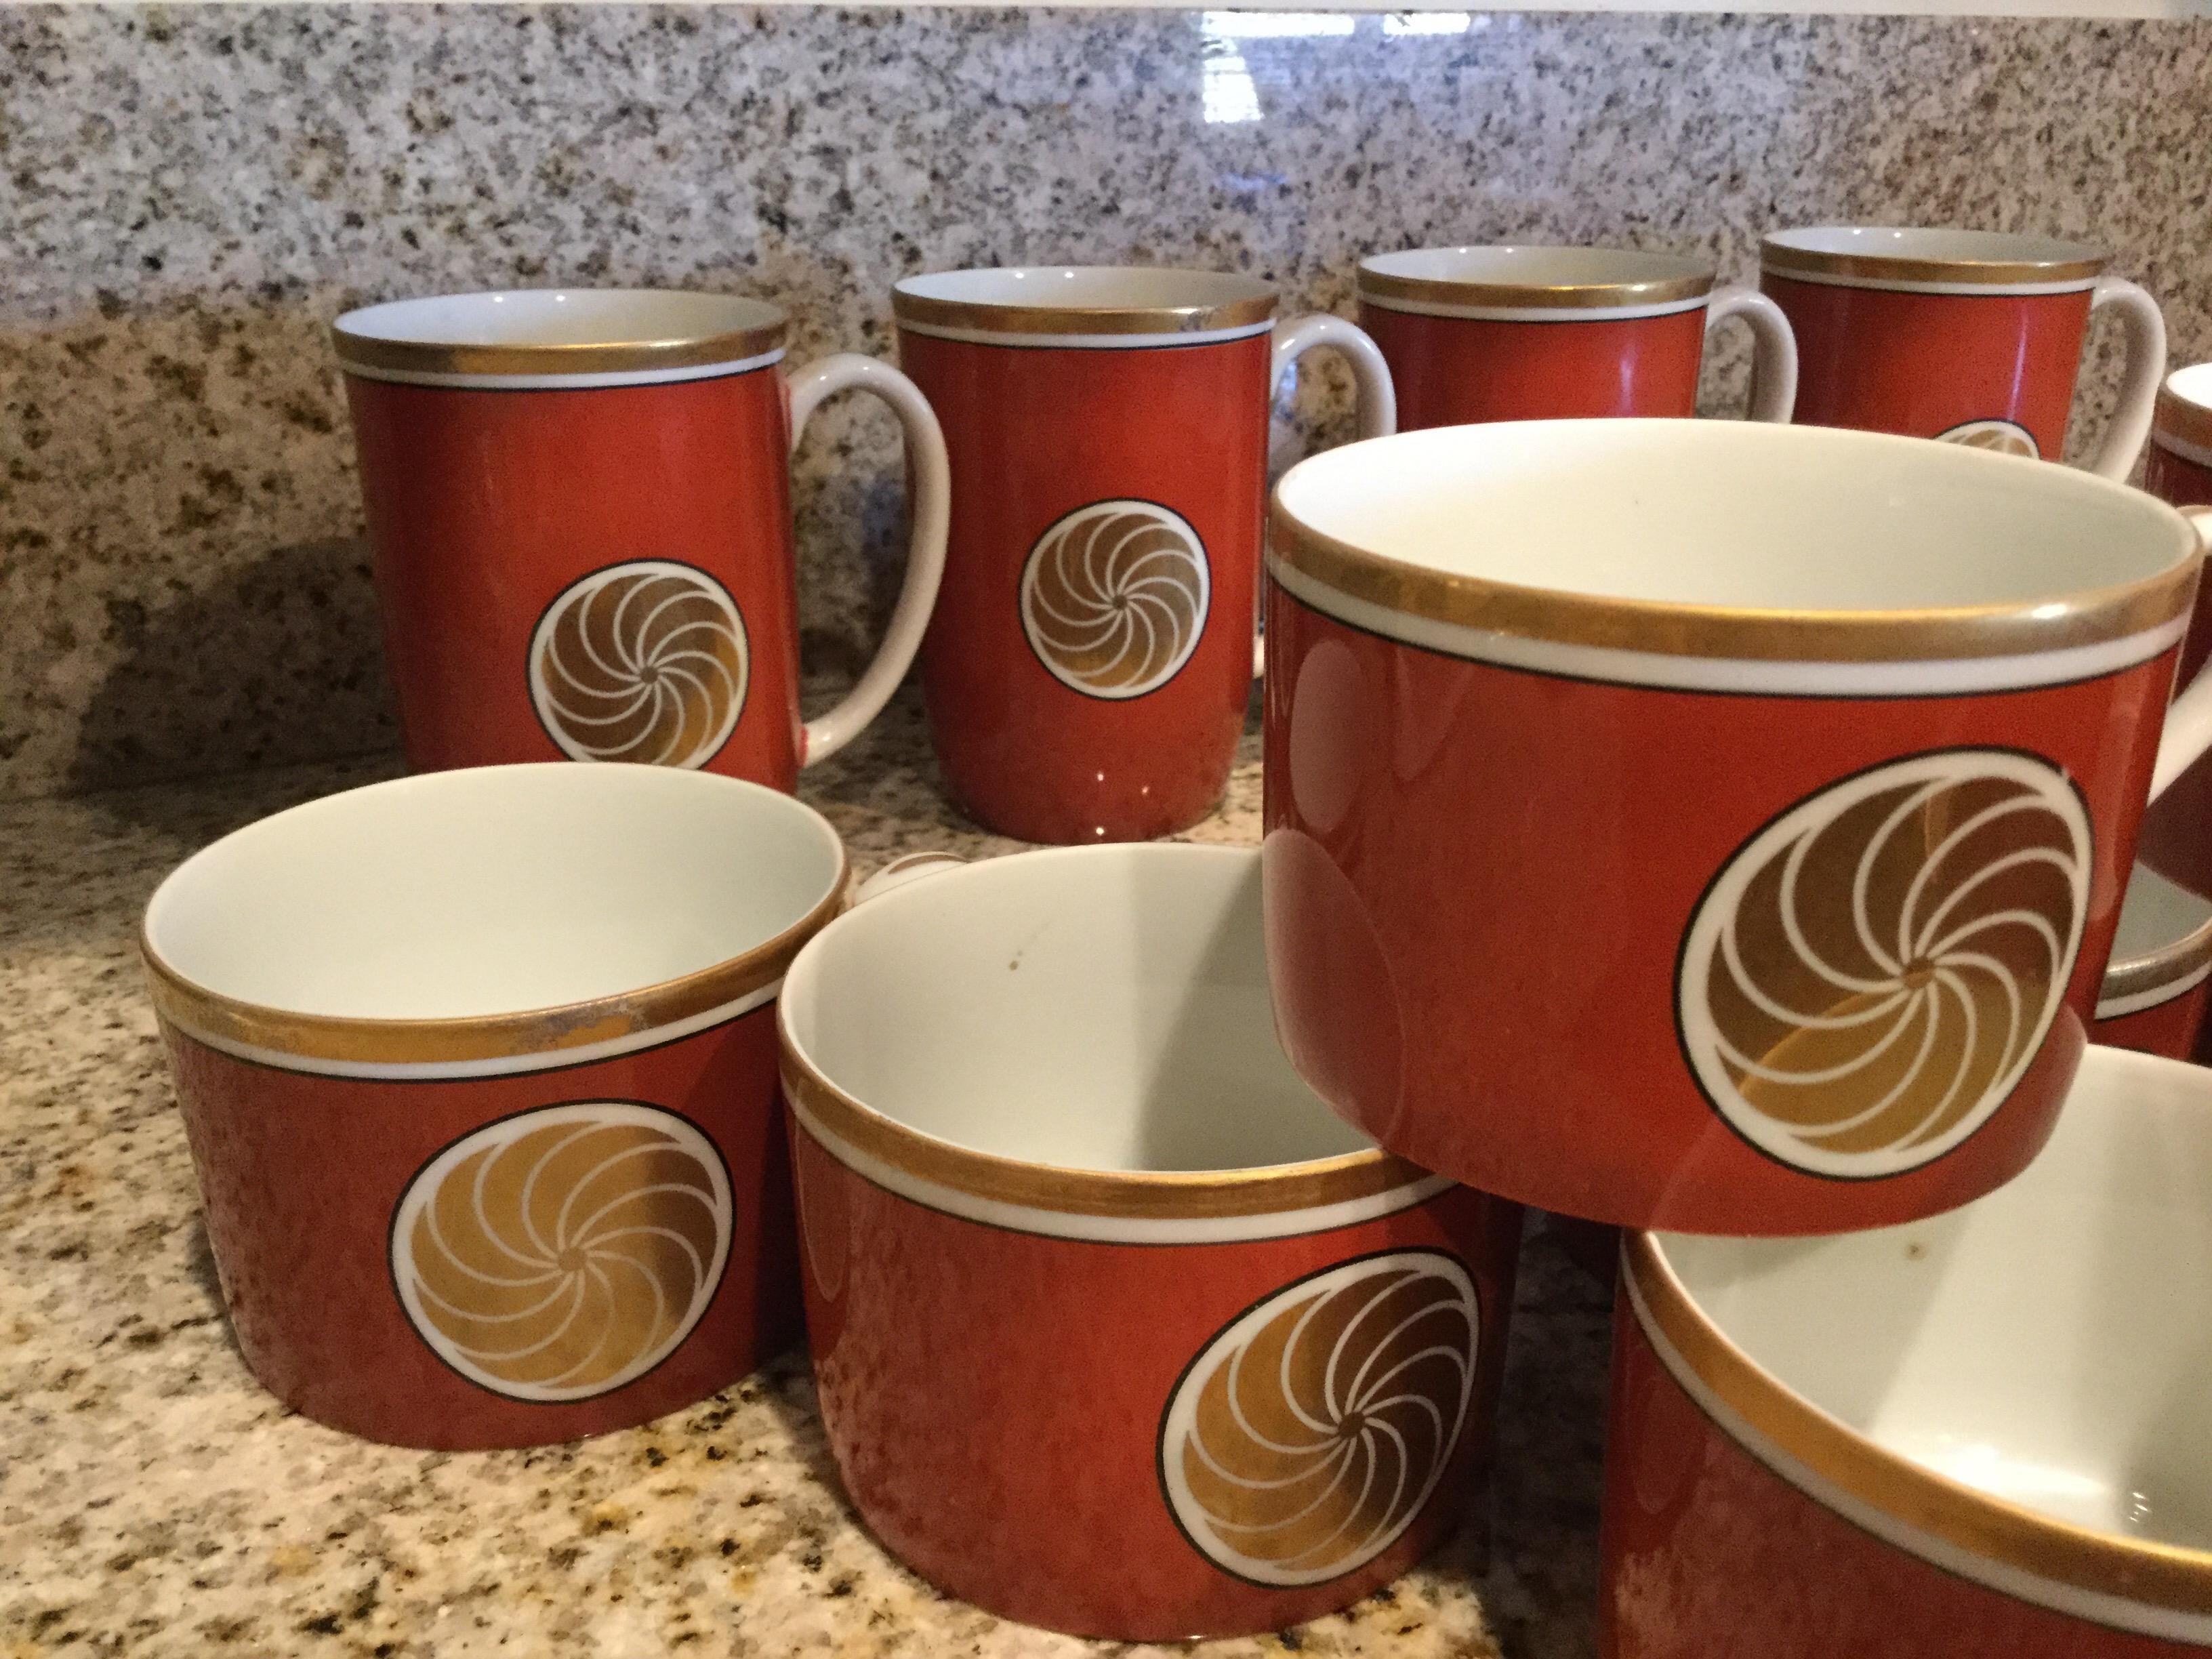 Fitz and Floyd were the premiere makes of china in the 70s and 80s. Their taste level and choice of patterns and colors made them legends! This Medallion d'Or in persimmon color is so chic! Set of 11 coffee cups and 4 coffee mugs. They appear never